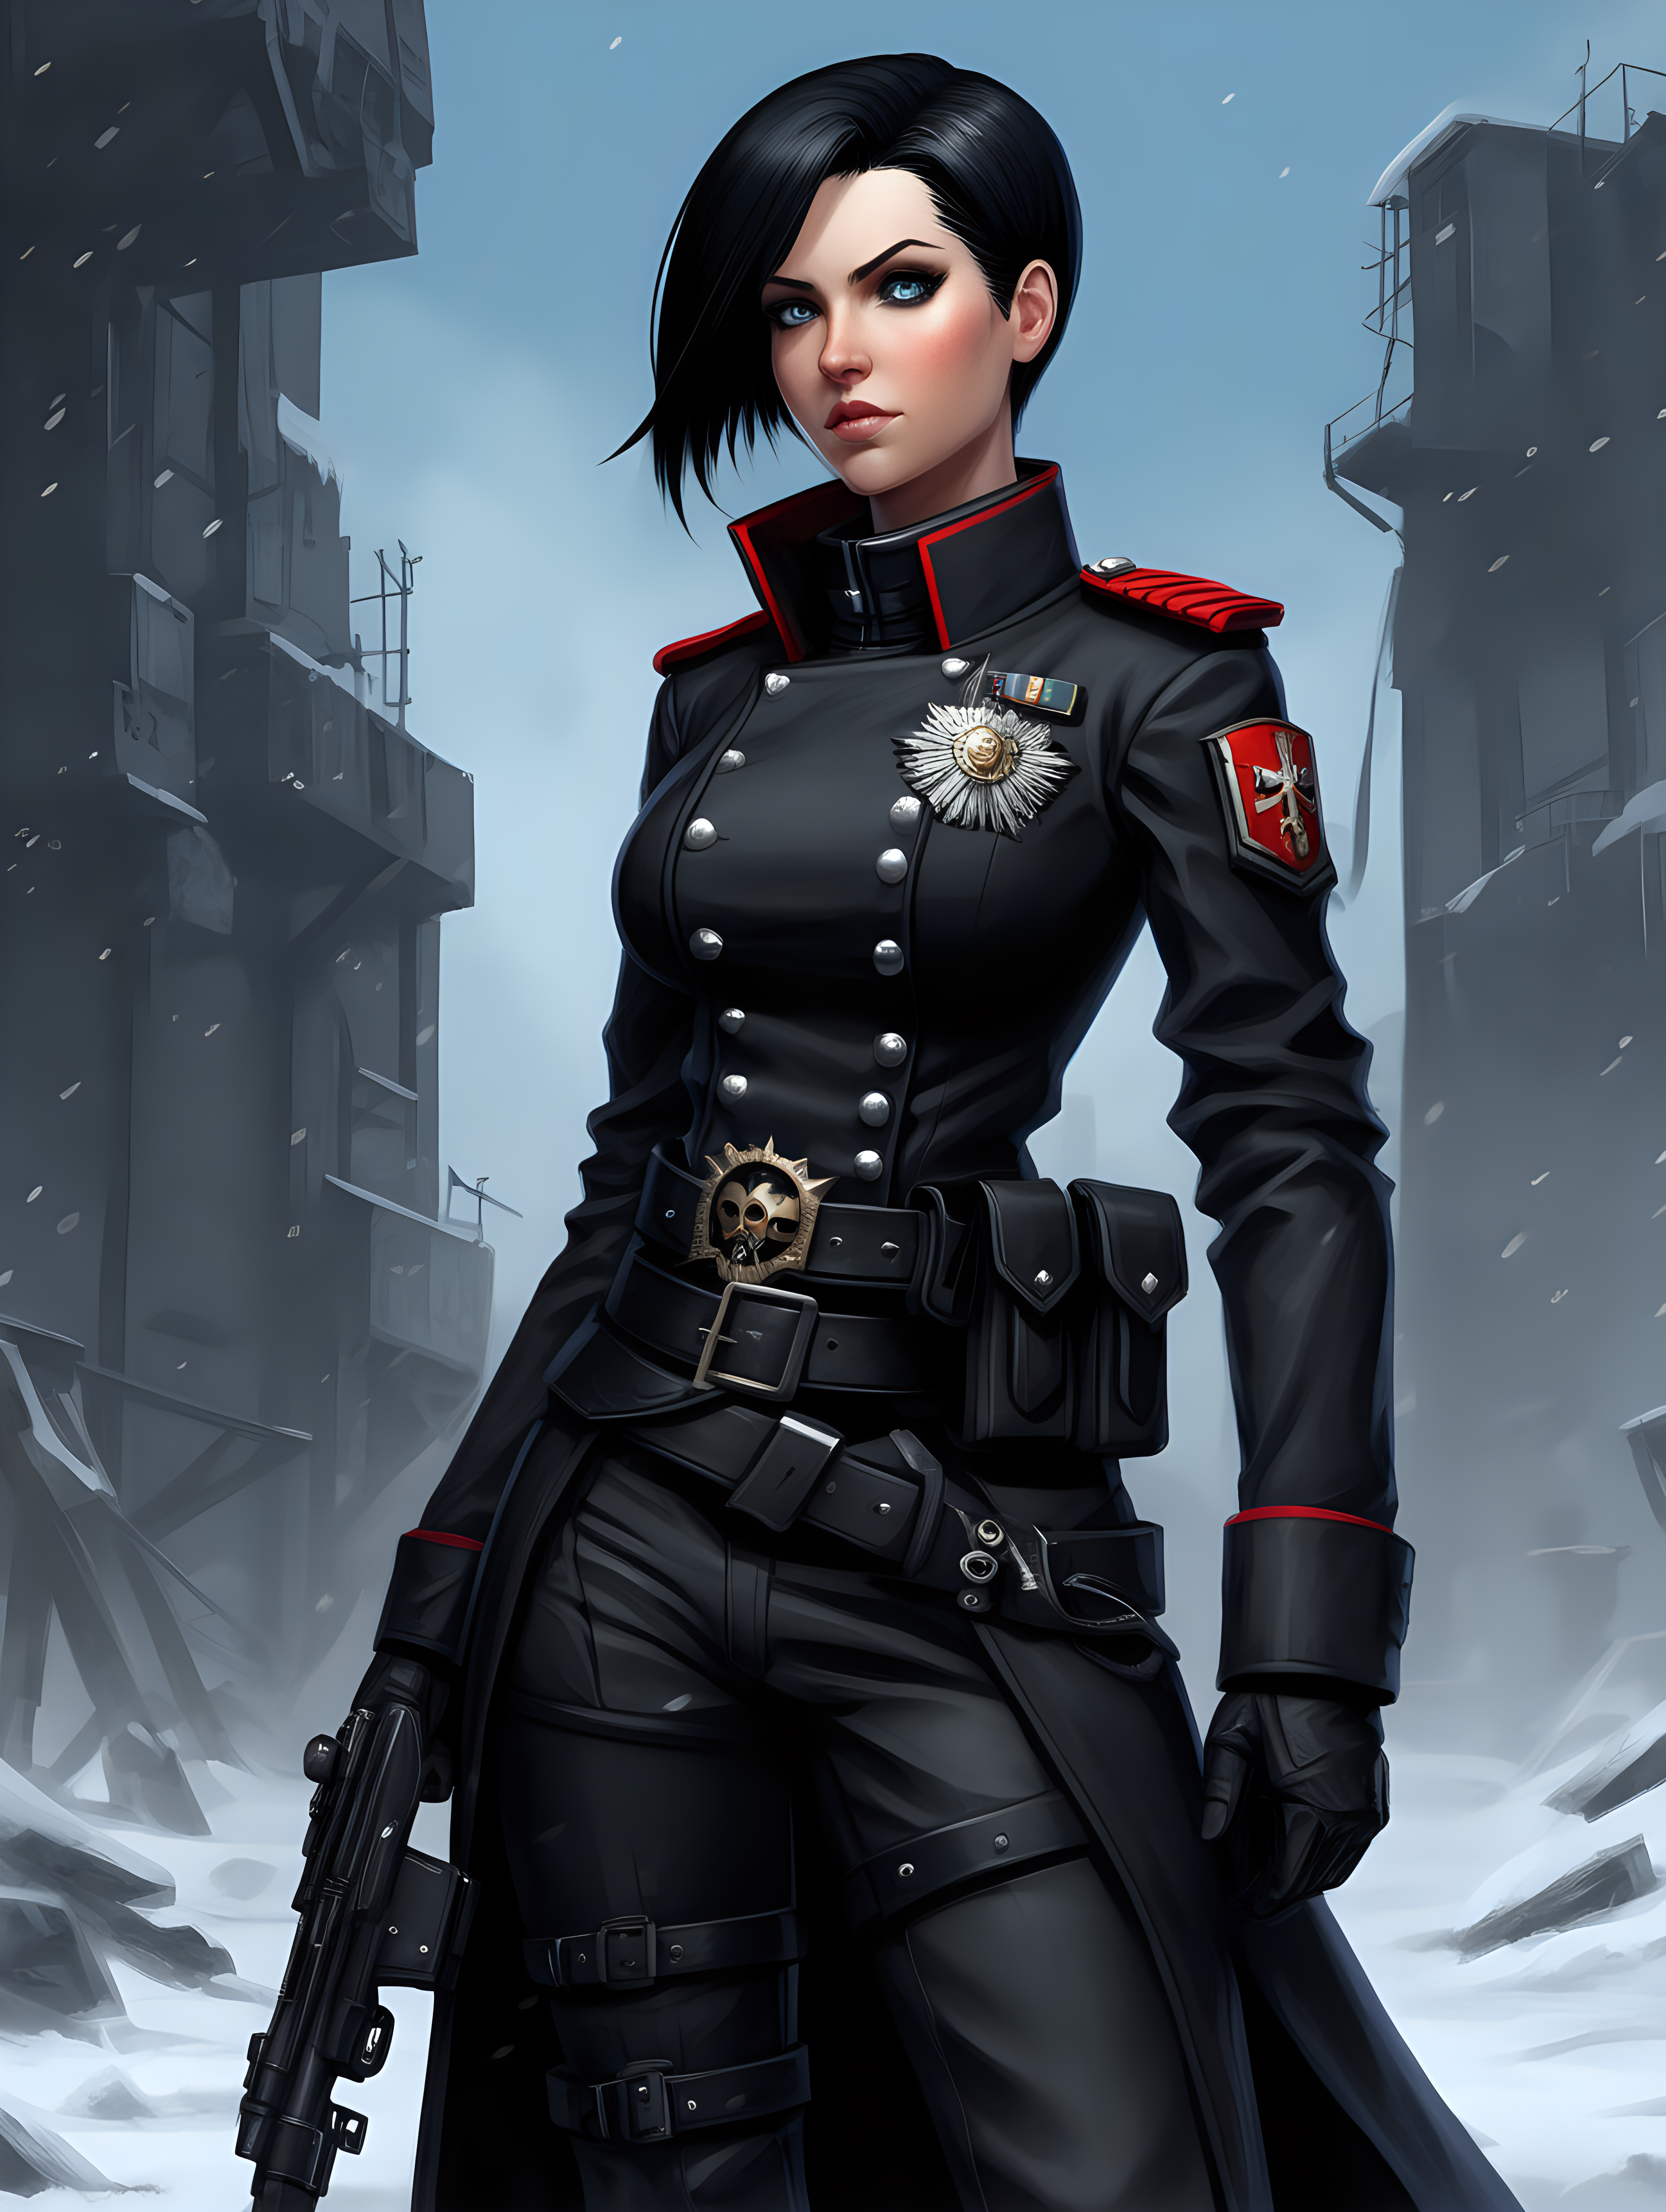 Warhammer 40K young Commissar woman. She has an hourglass shape. She has raven black hair. She has a very short hair style similar to what Maya, from Borderlands 2, has. Dark black uniform. Belt has a lot of pouches, grenades, black pistol magazines, and a black holster attached. Bandolier around waist. Her dark black uniform jacket fits perfectly, fully closed and a single line of buttons. She has a lot of eye shadow. Background scene is snowy trench line. She has icy blue eyes. 